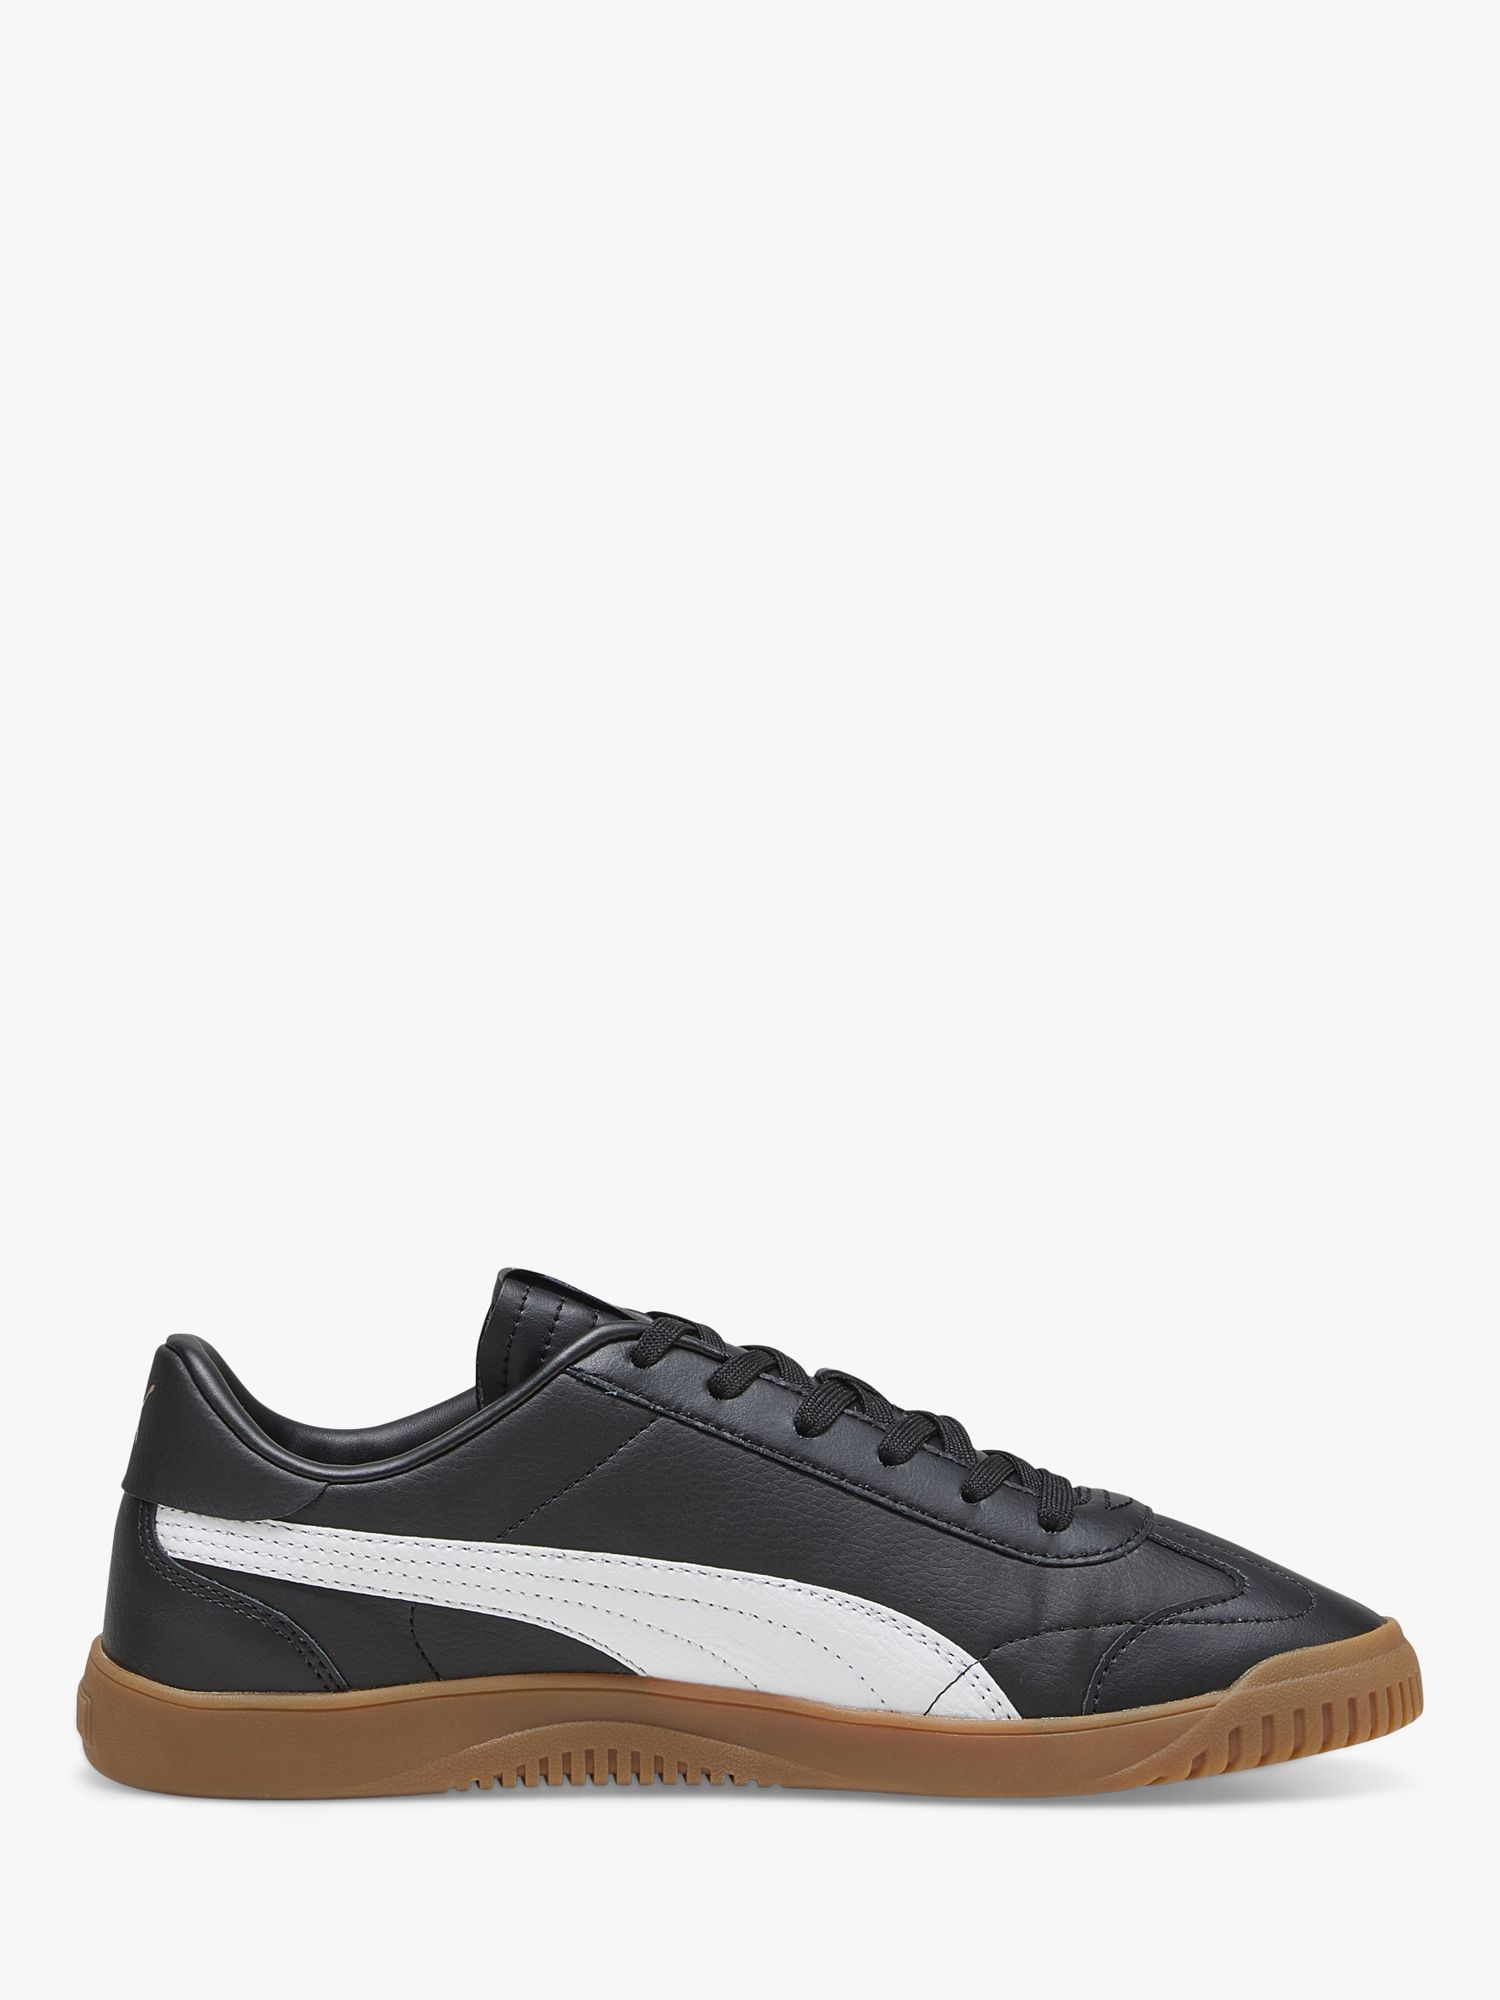 PUMA Club 5v5 Leather Lace Up Trainers, Black/White, 7